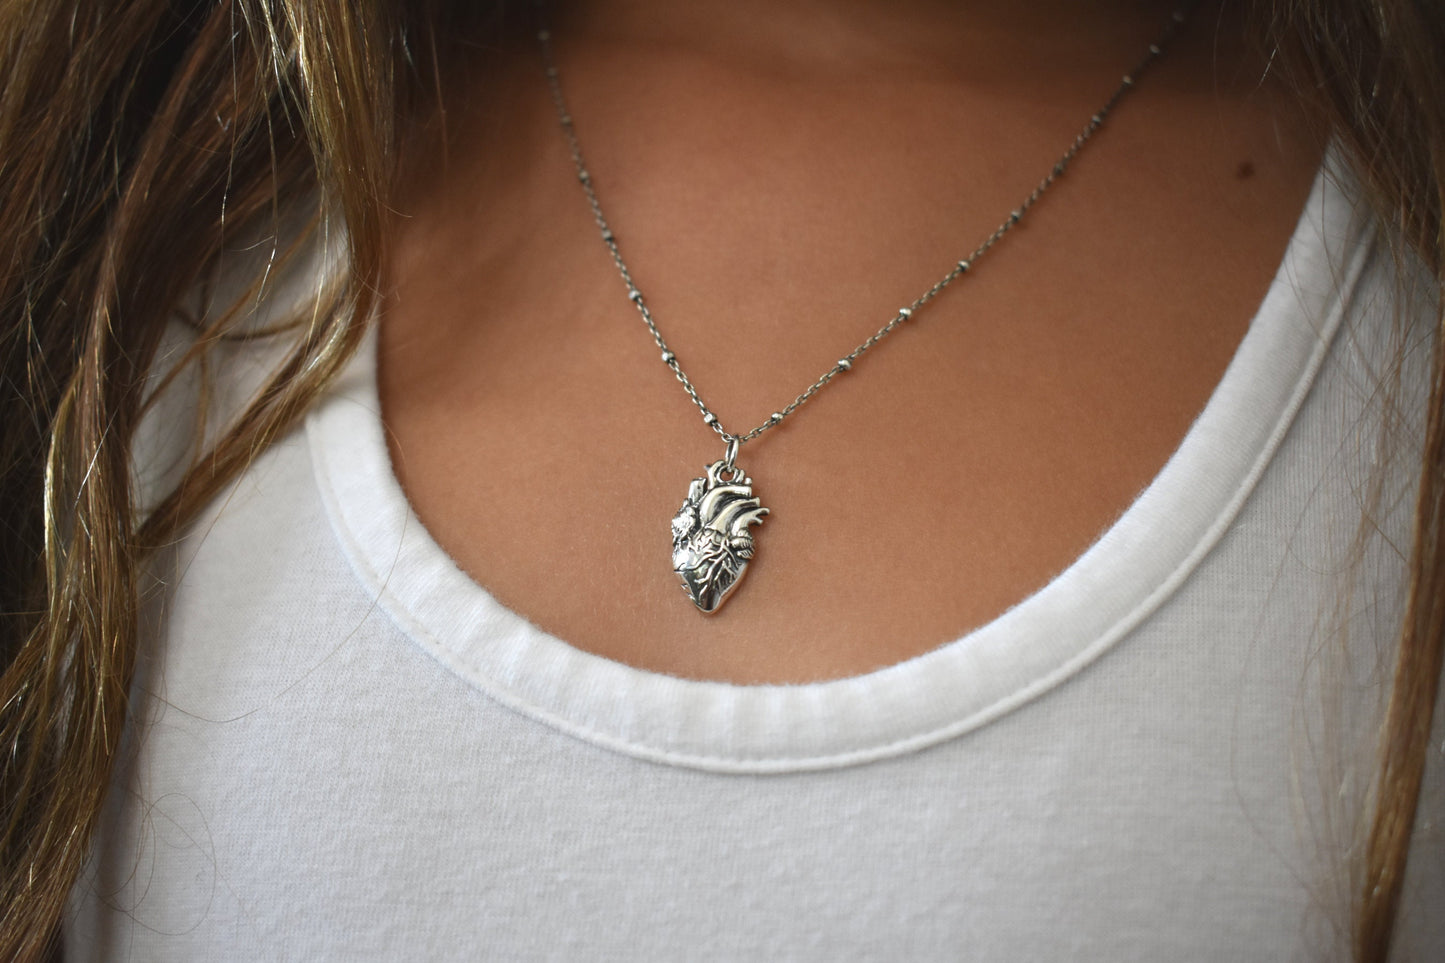 Anatomical Heart Necklace- Heart Necklace, Realistic Heart, Human Heart